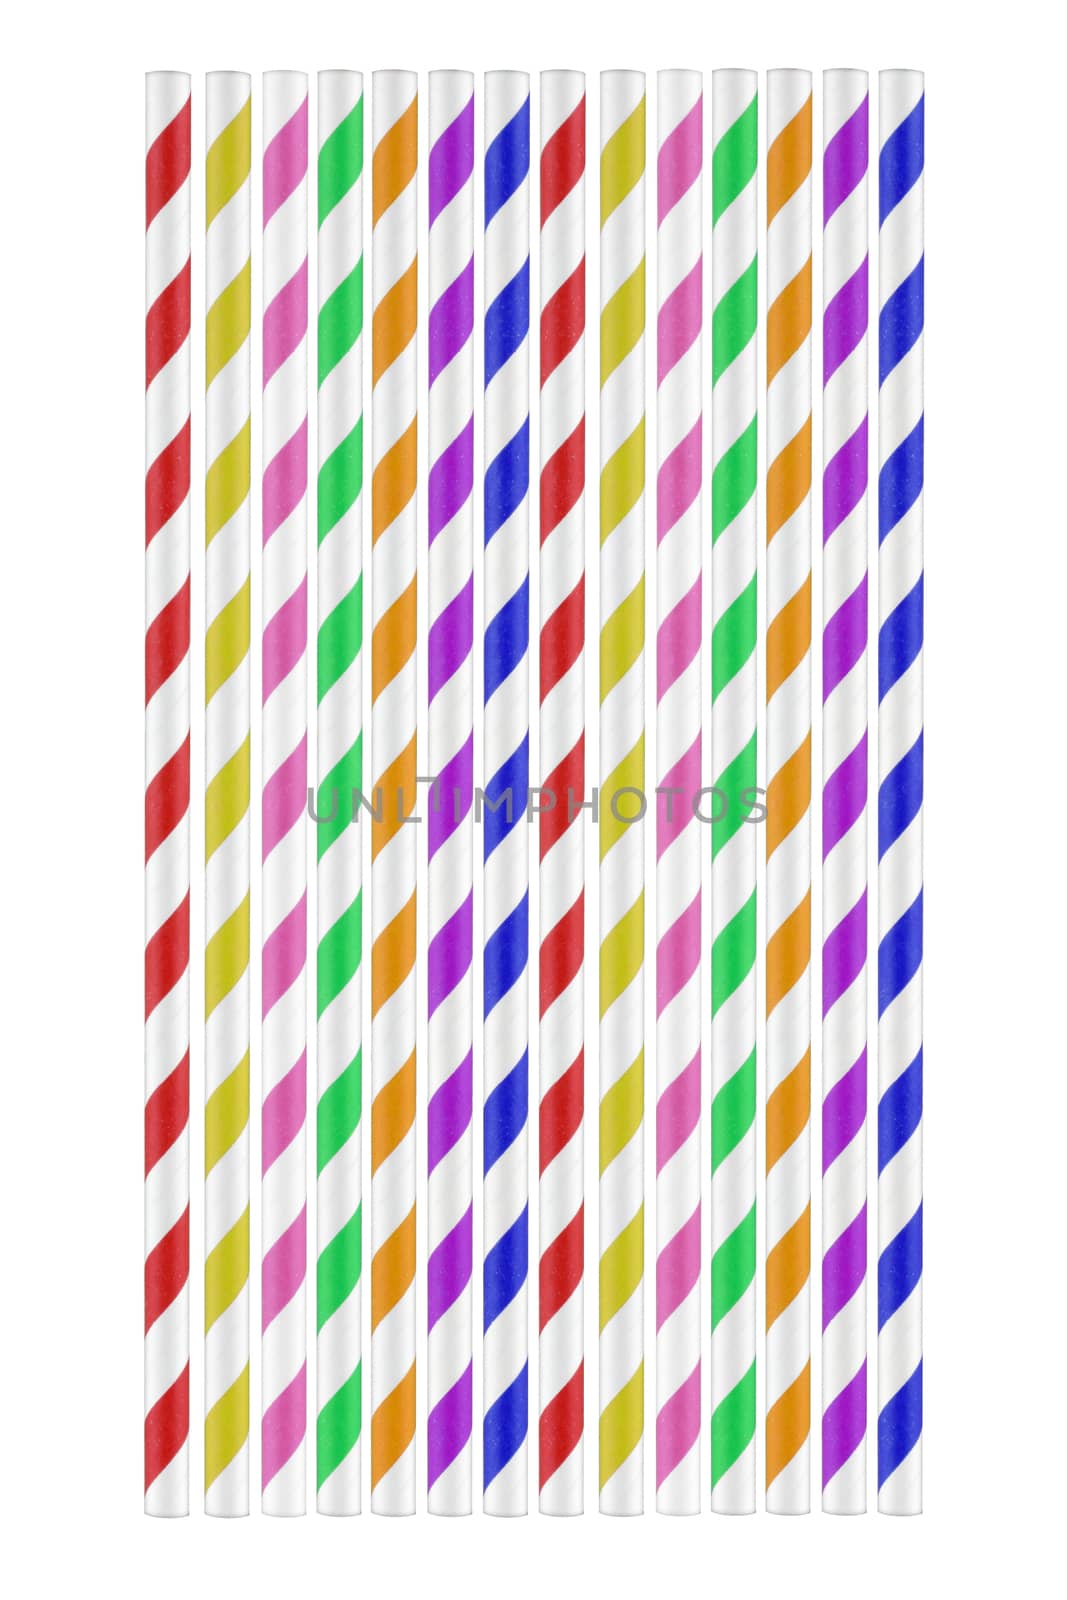 A set of colored paper drinking straws on white with clipping path